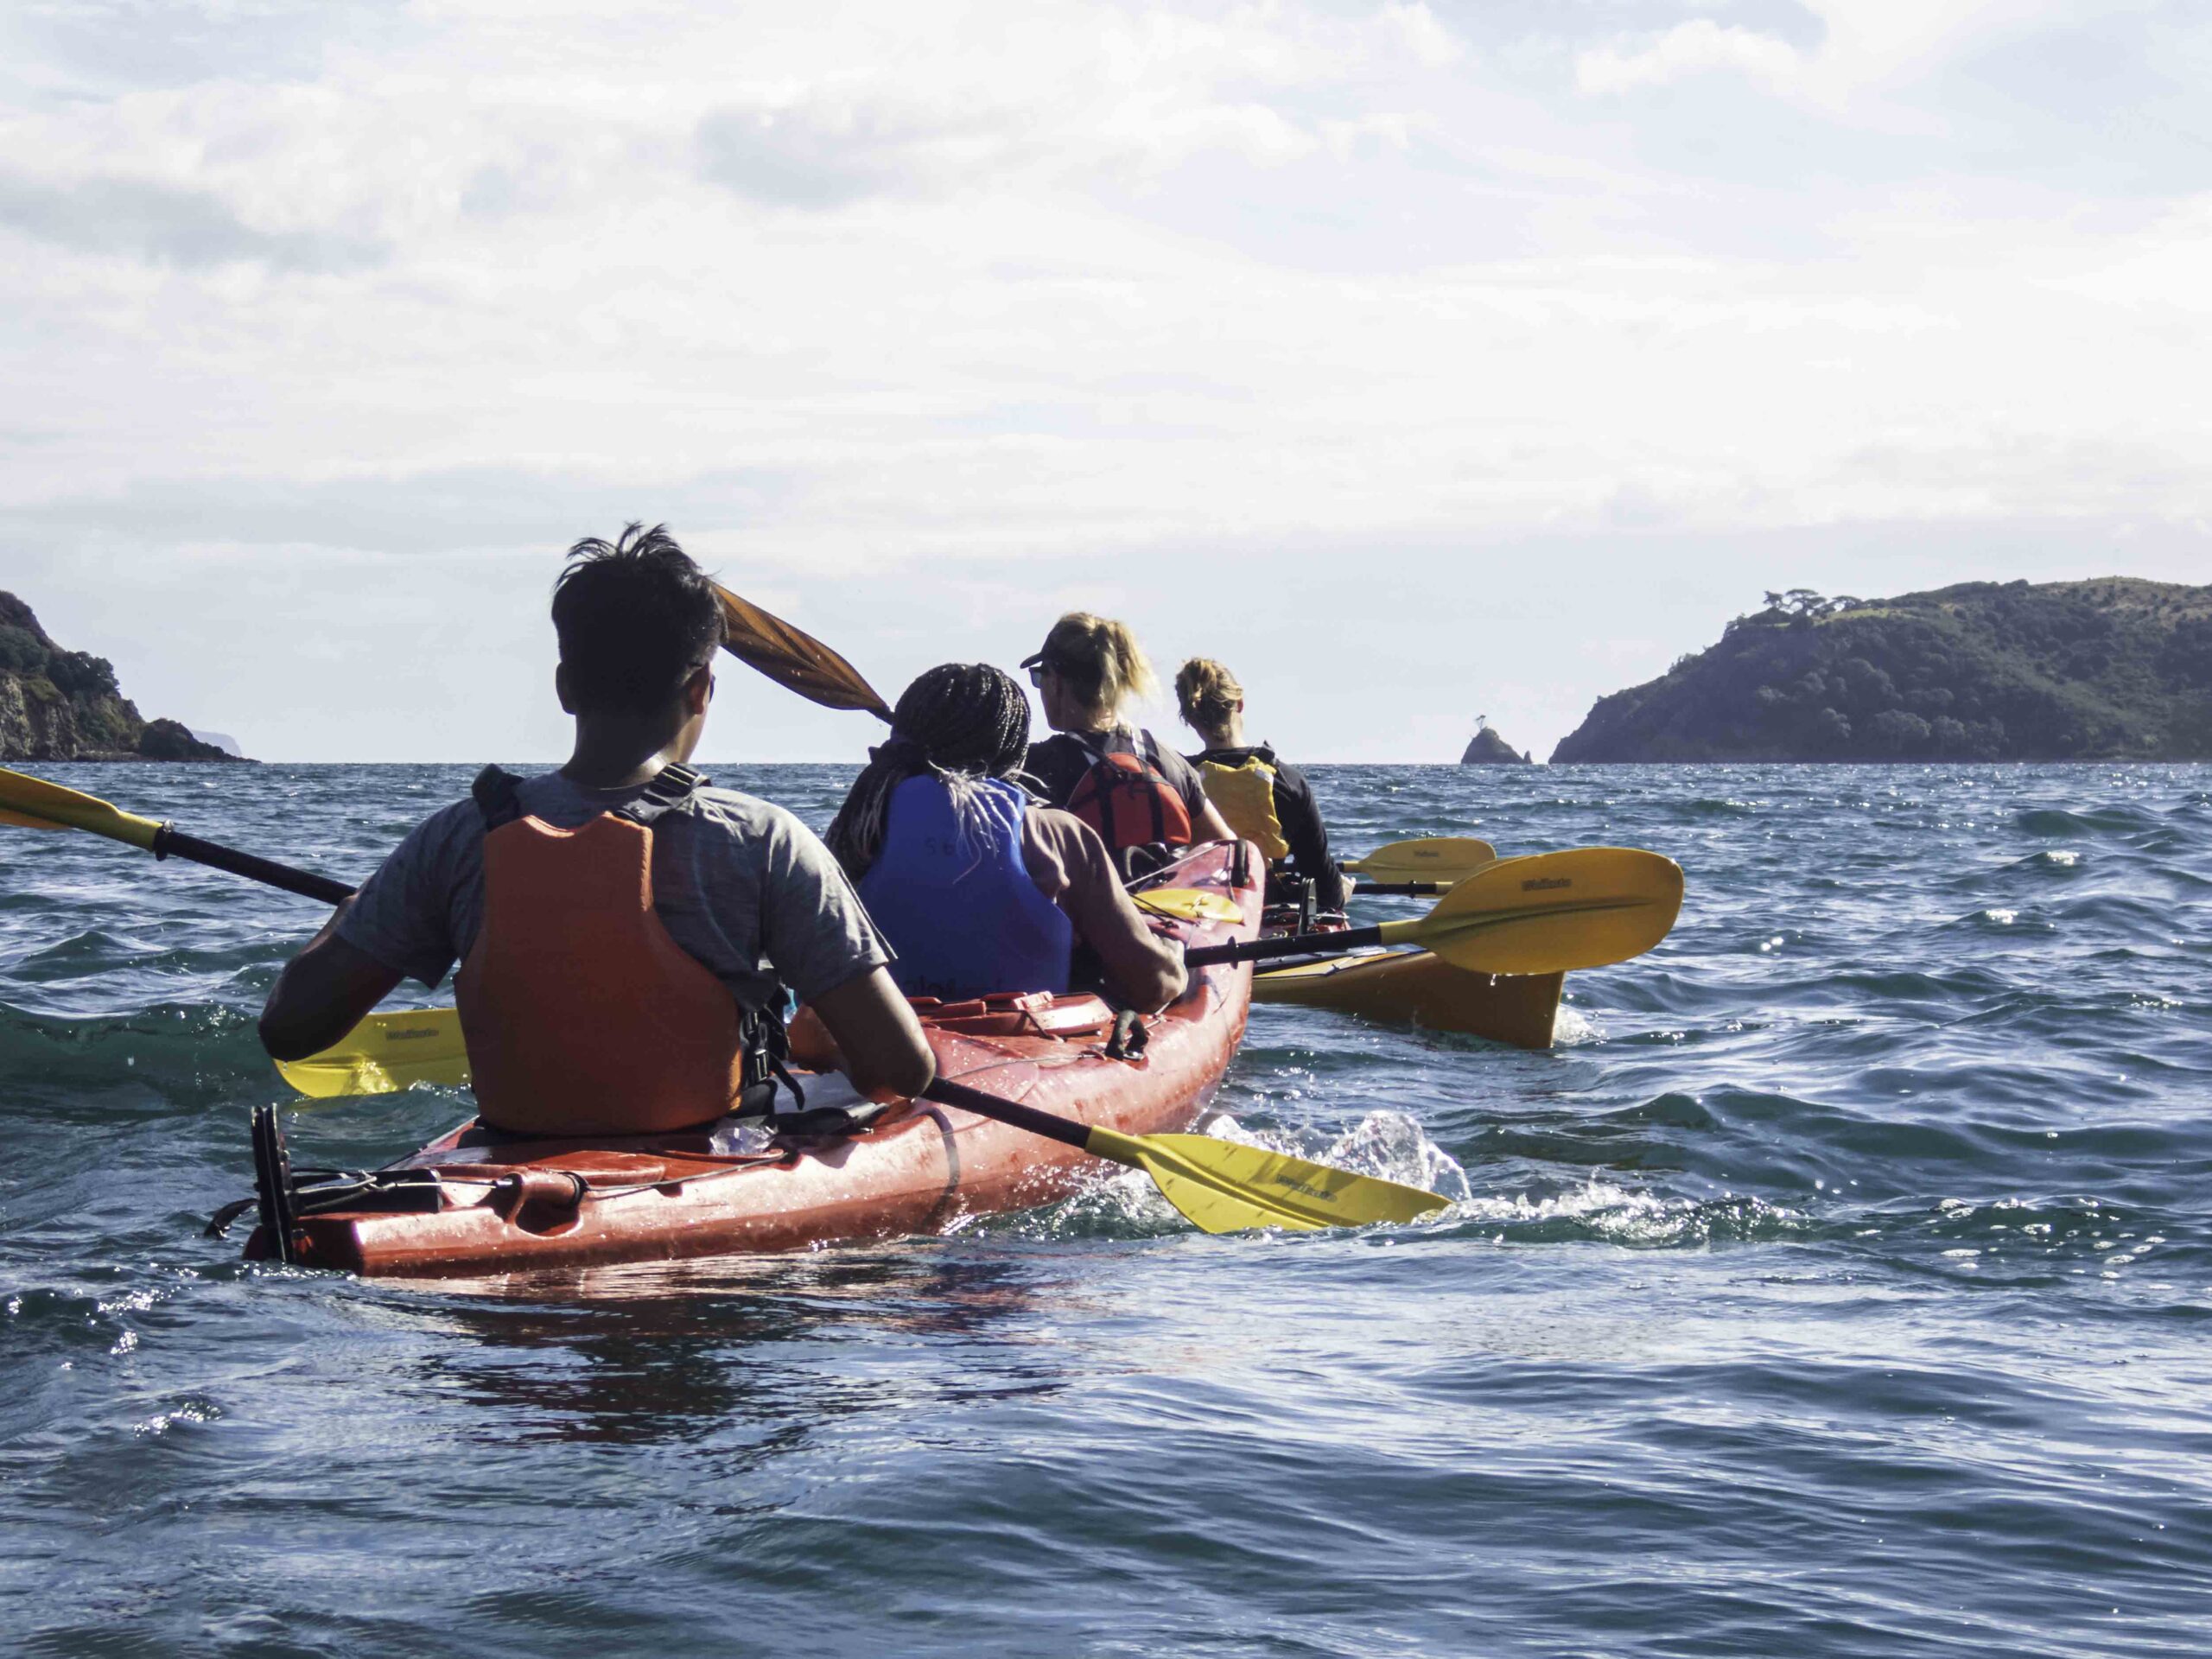 Students Kayaking at Great Barrier